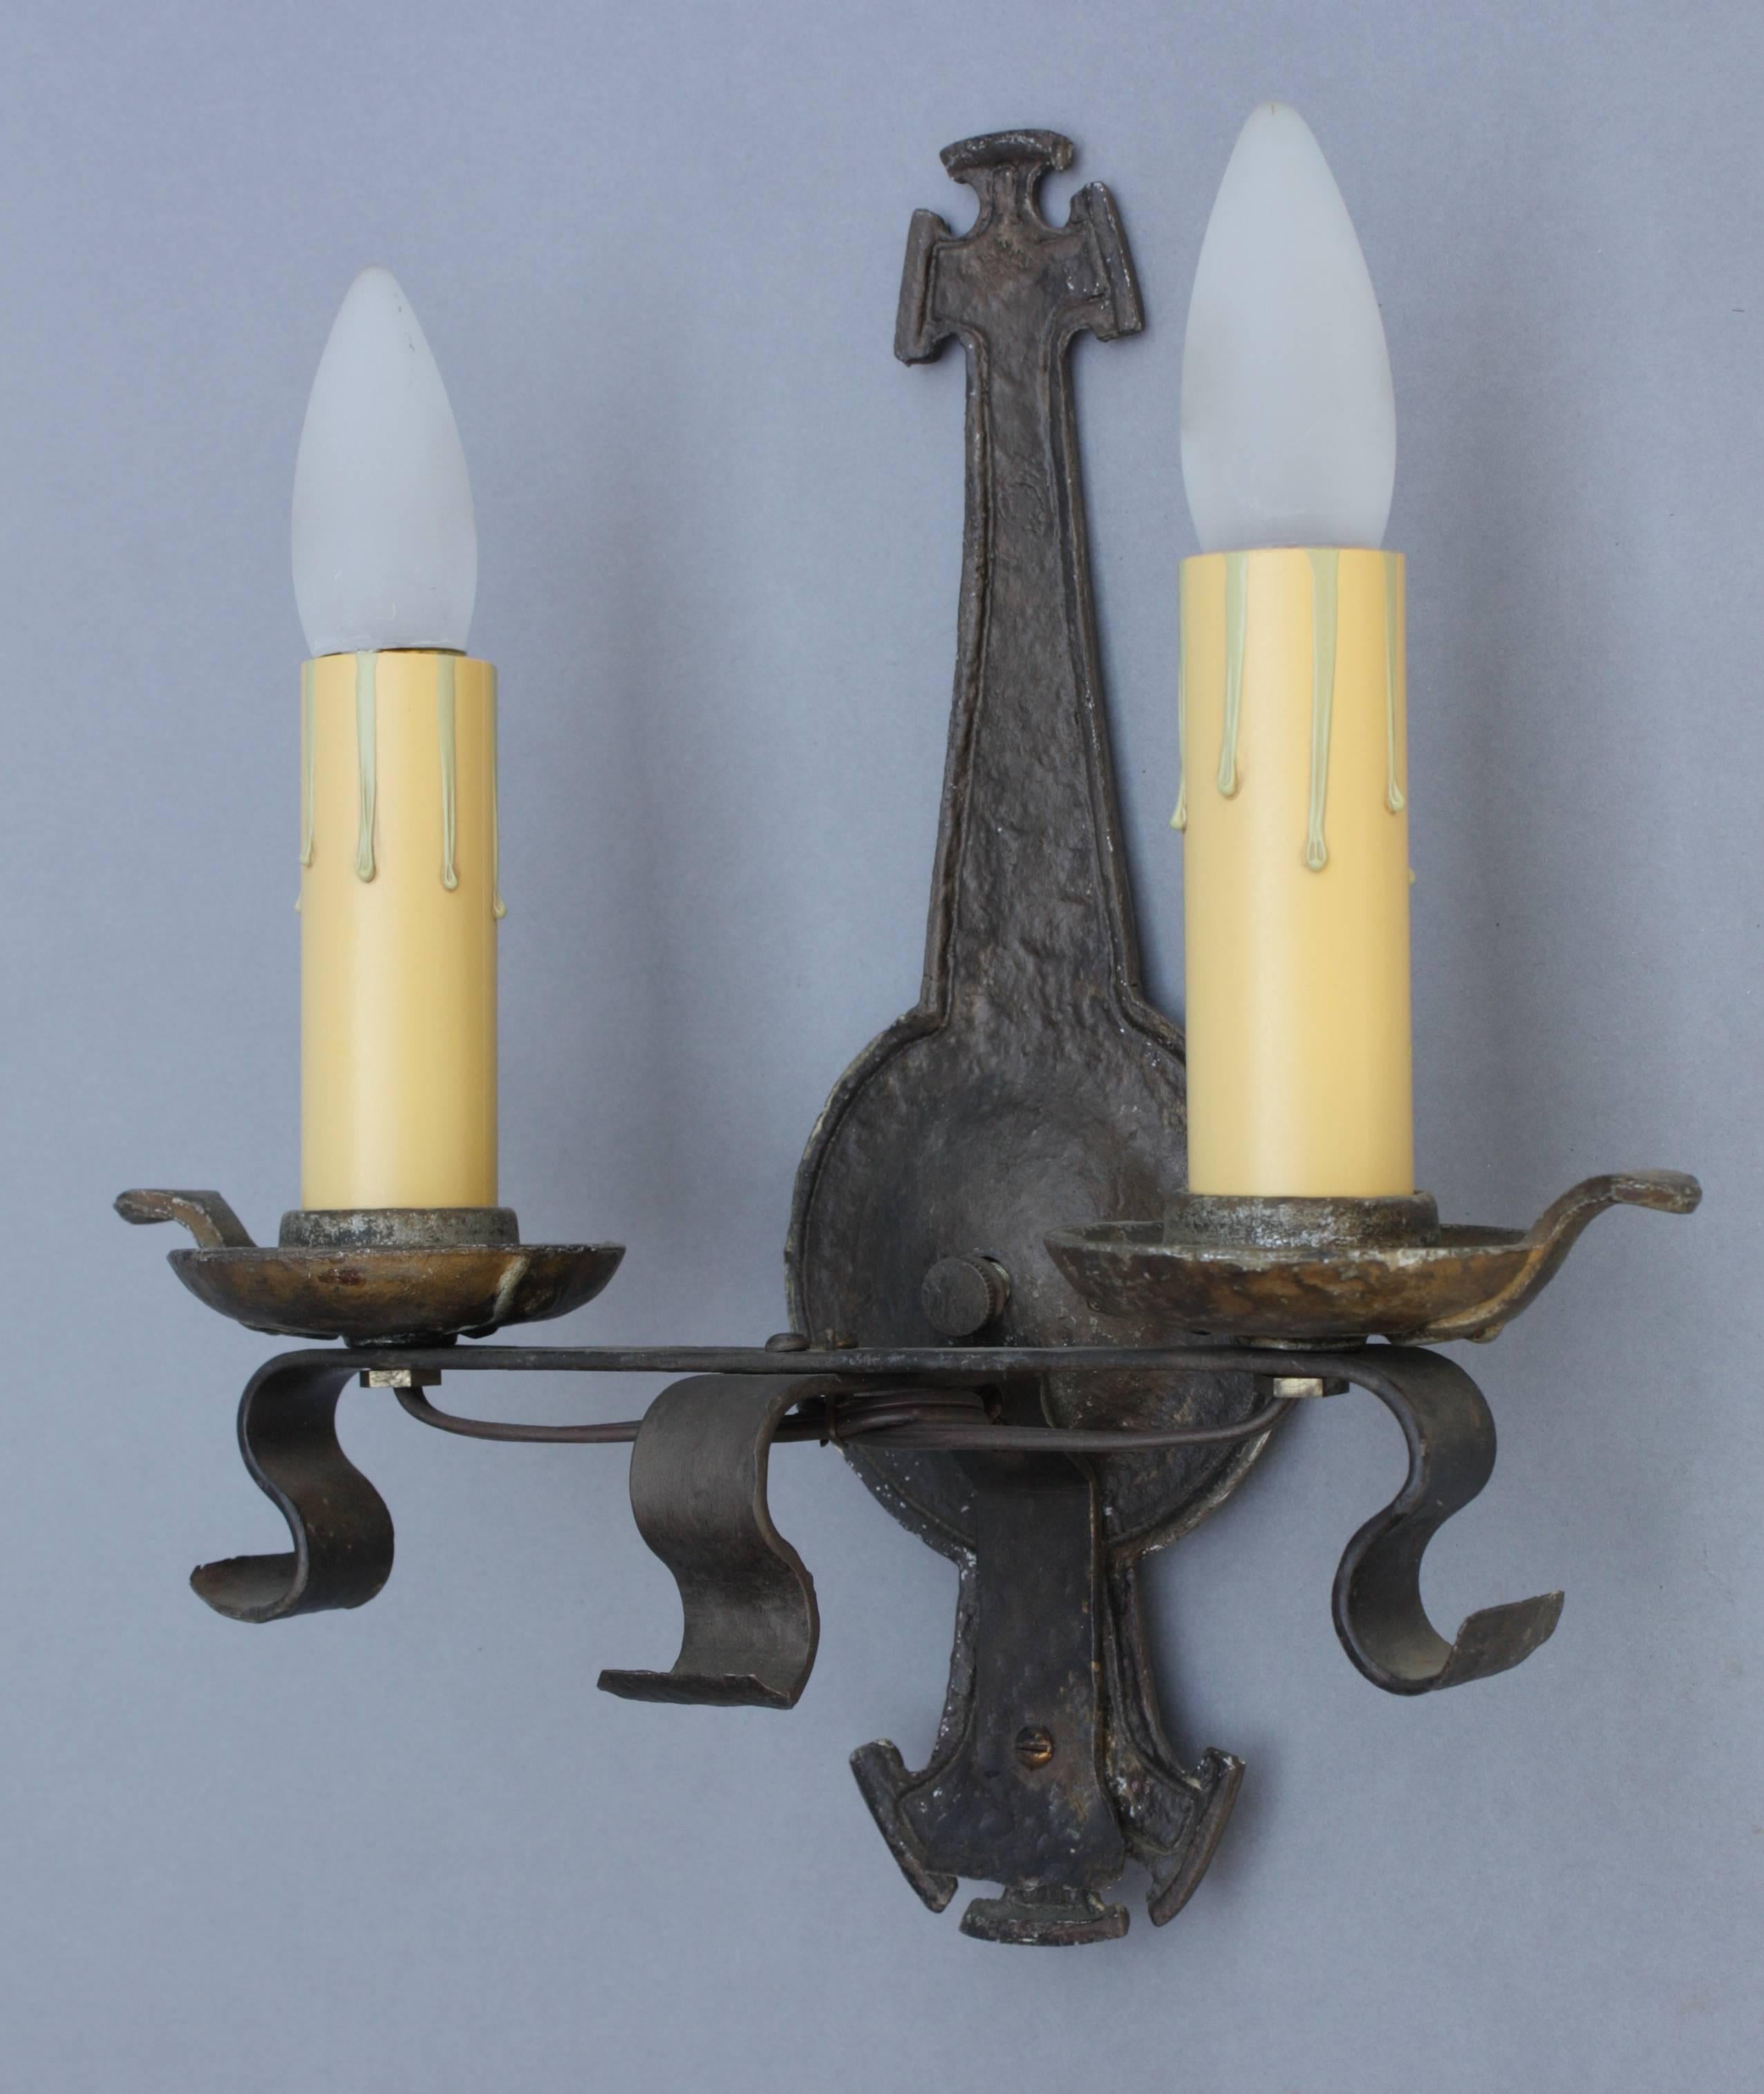 1920s Spanish Revival two-light sconce. Hand-wrought iron.